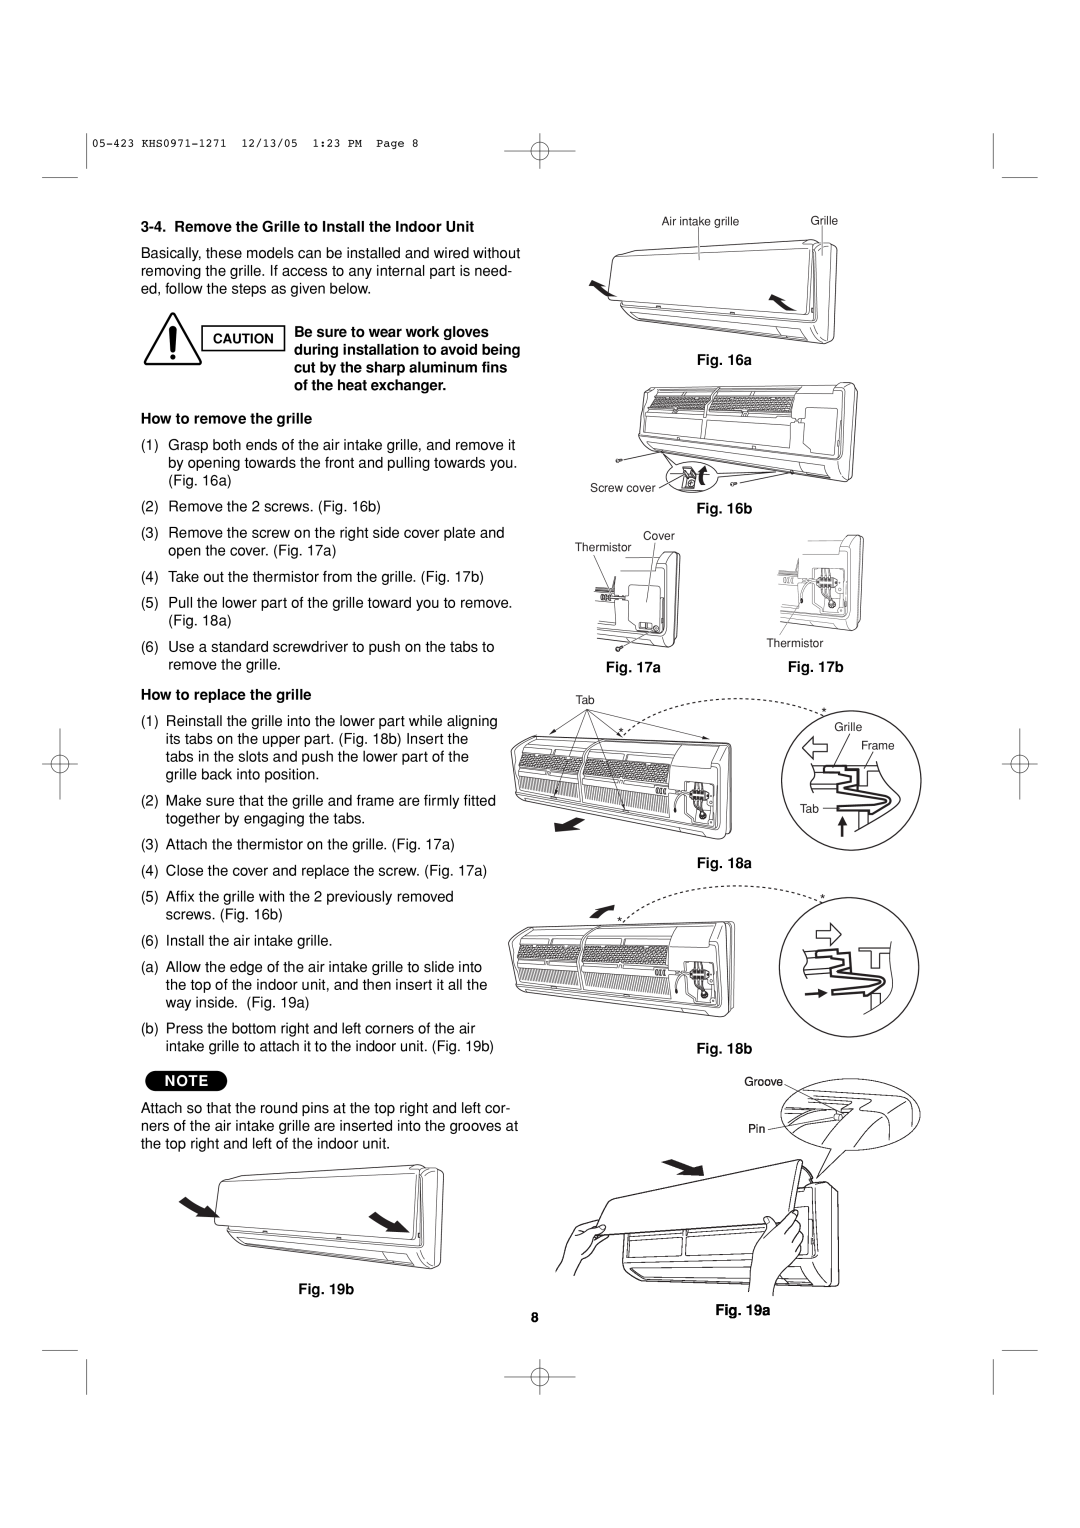 Sanyo 8.53E+13 installation instructions Remove the Grille to Install the Indoor Unit 